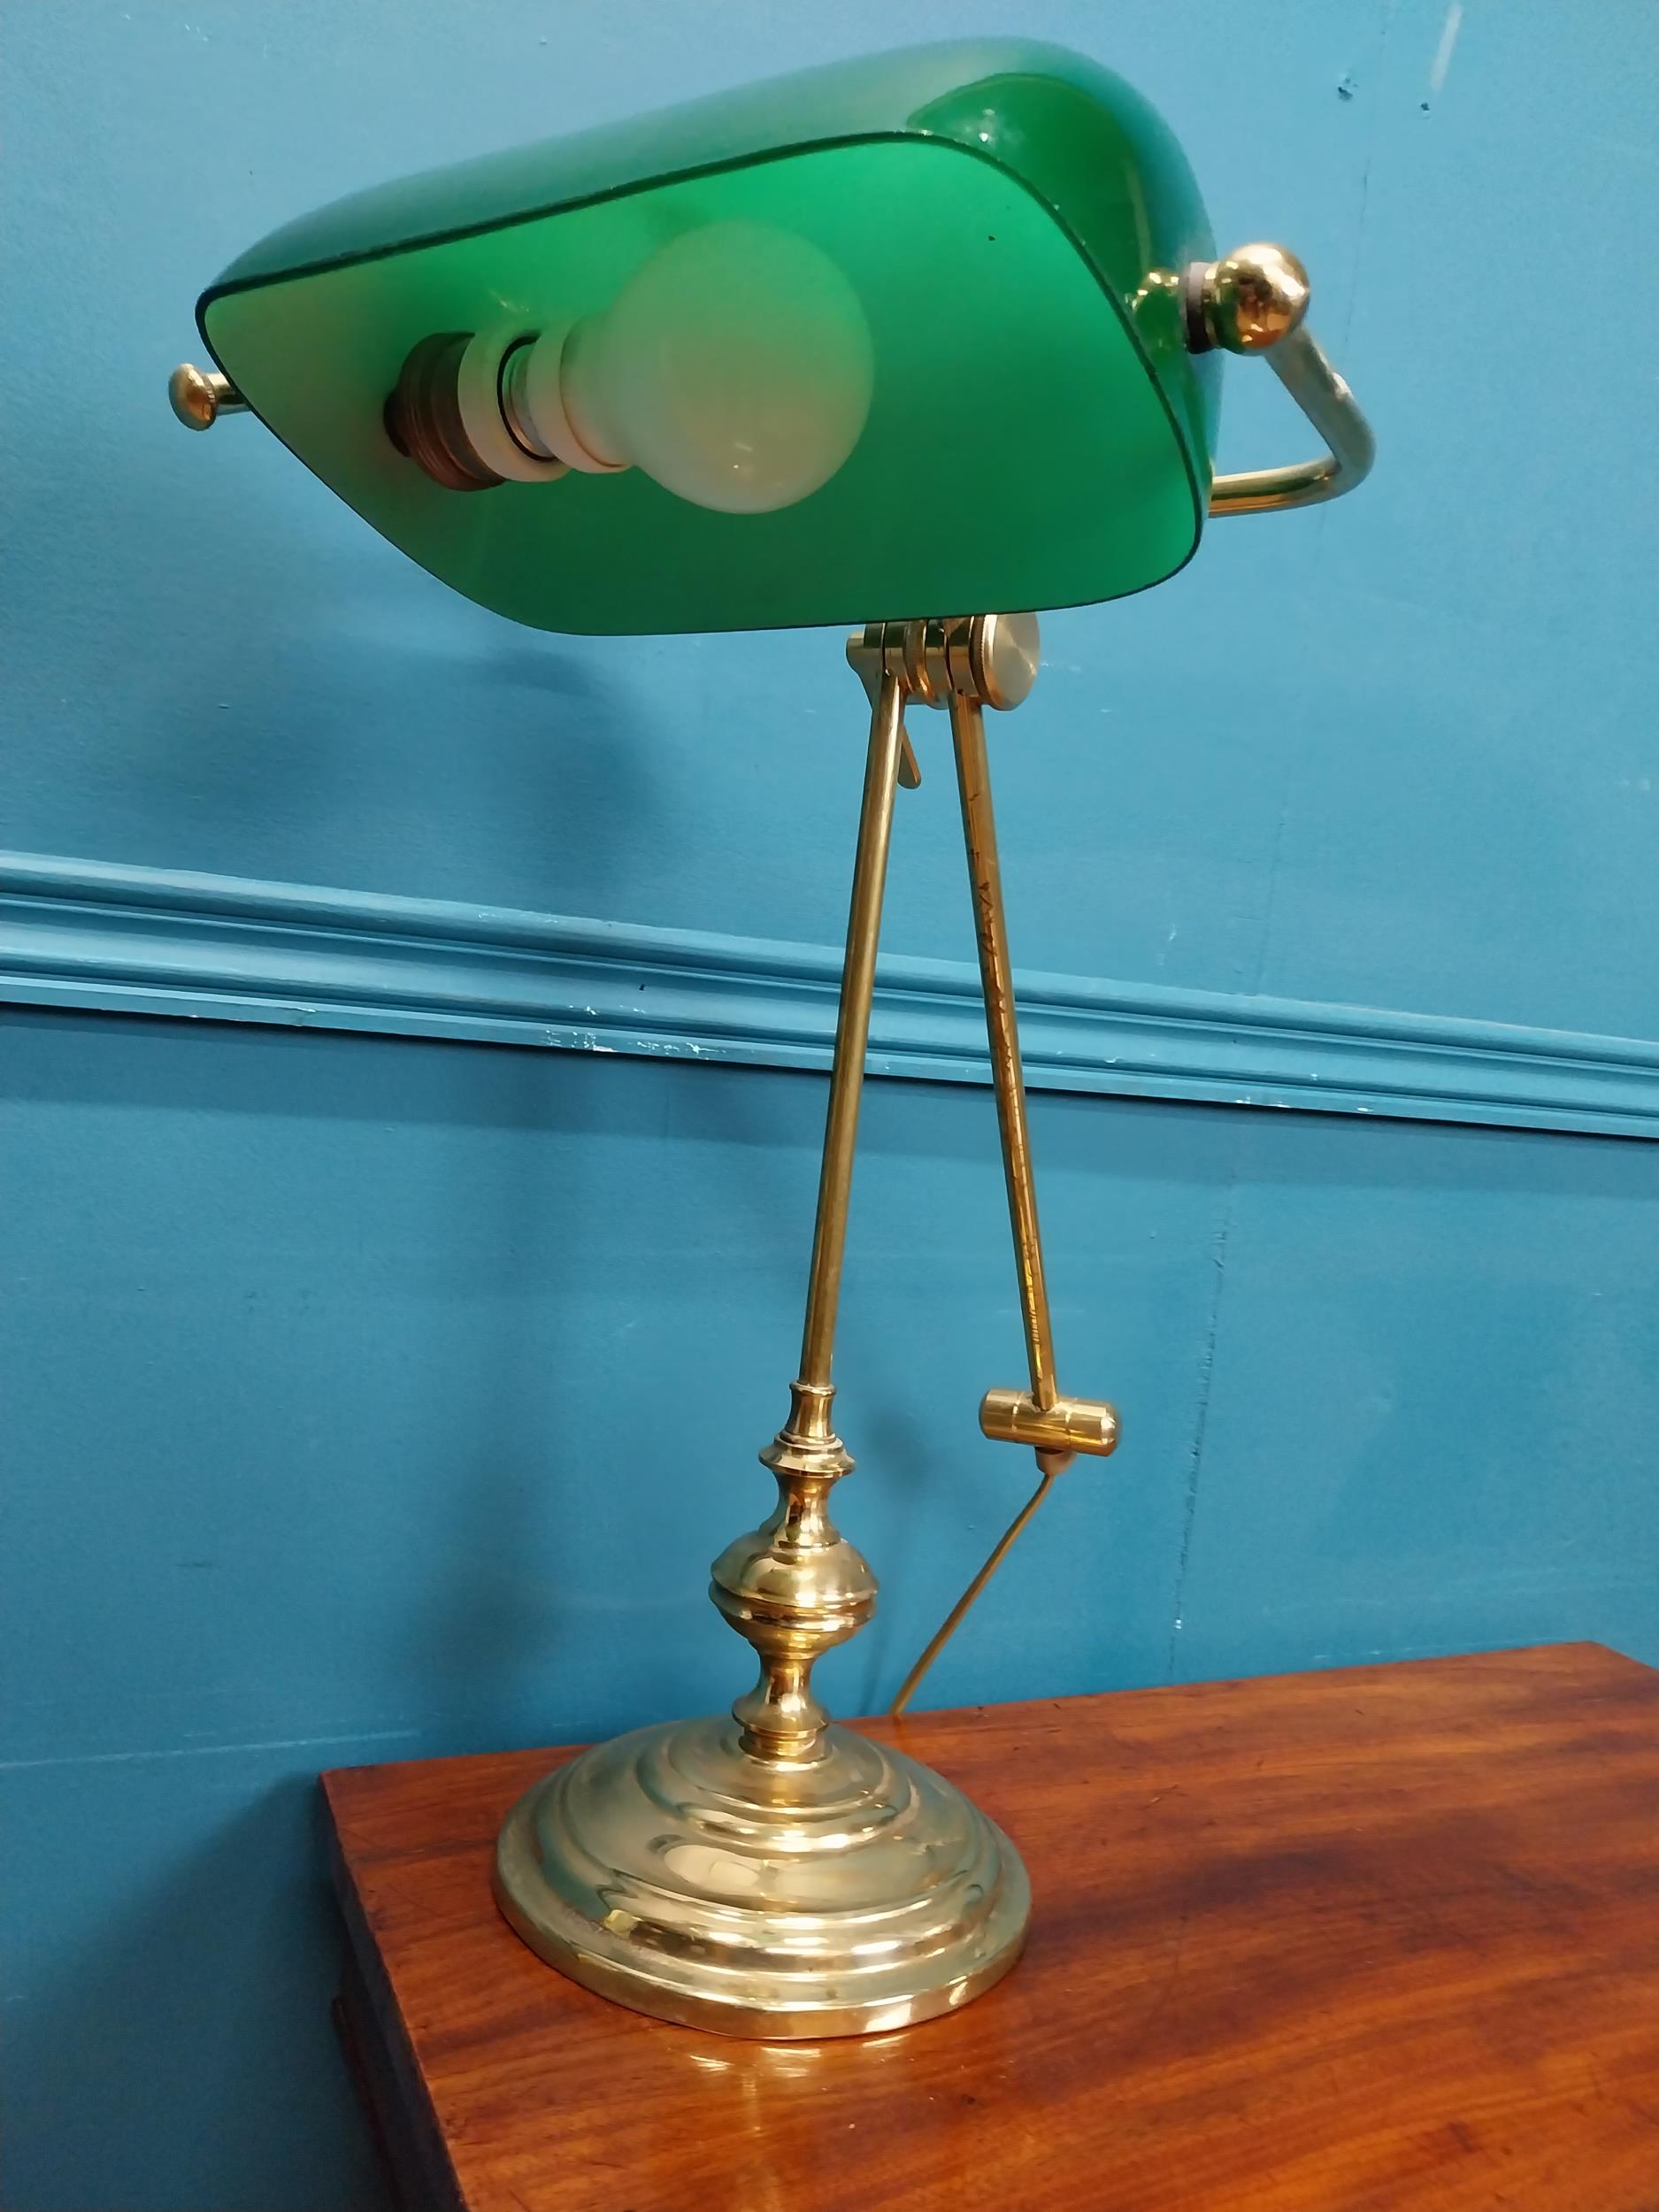 Good quality brass banker's lamp with green glass shade. {49 cm H x 26 cm W x 32 cm W}. - Image 5 of 9